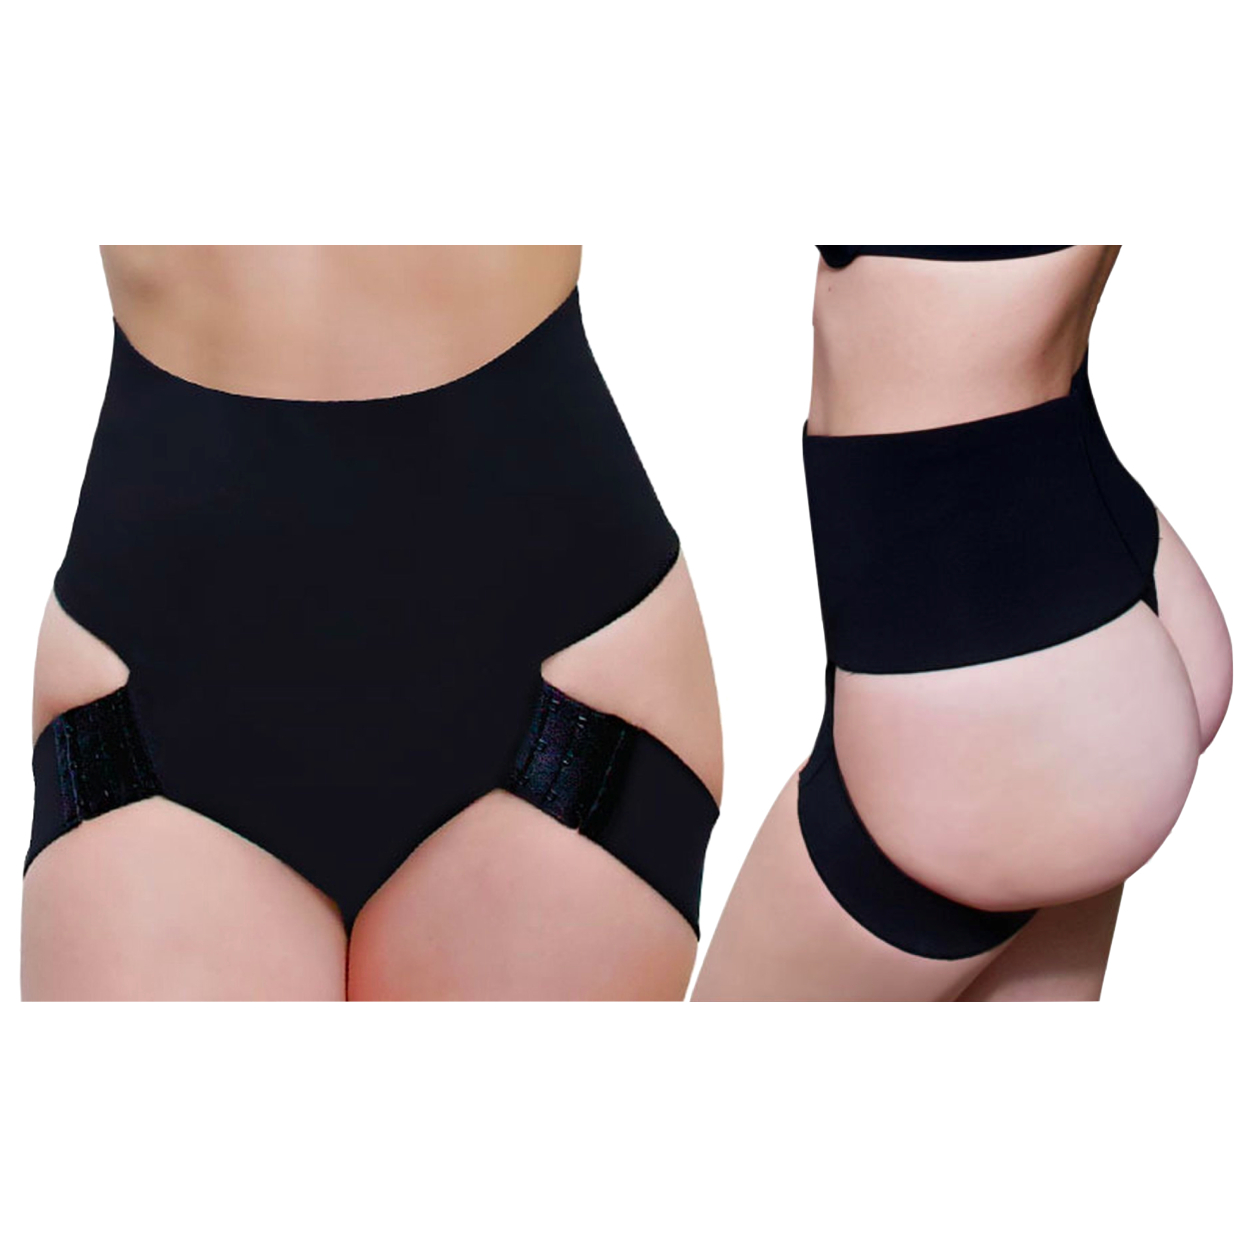 Adjustable Butt Booster Control Shaper In Regular And Plus Sizes - Black, 4X